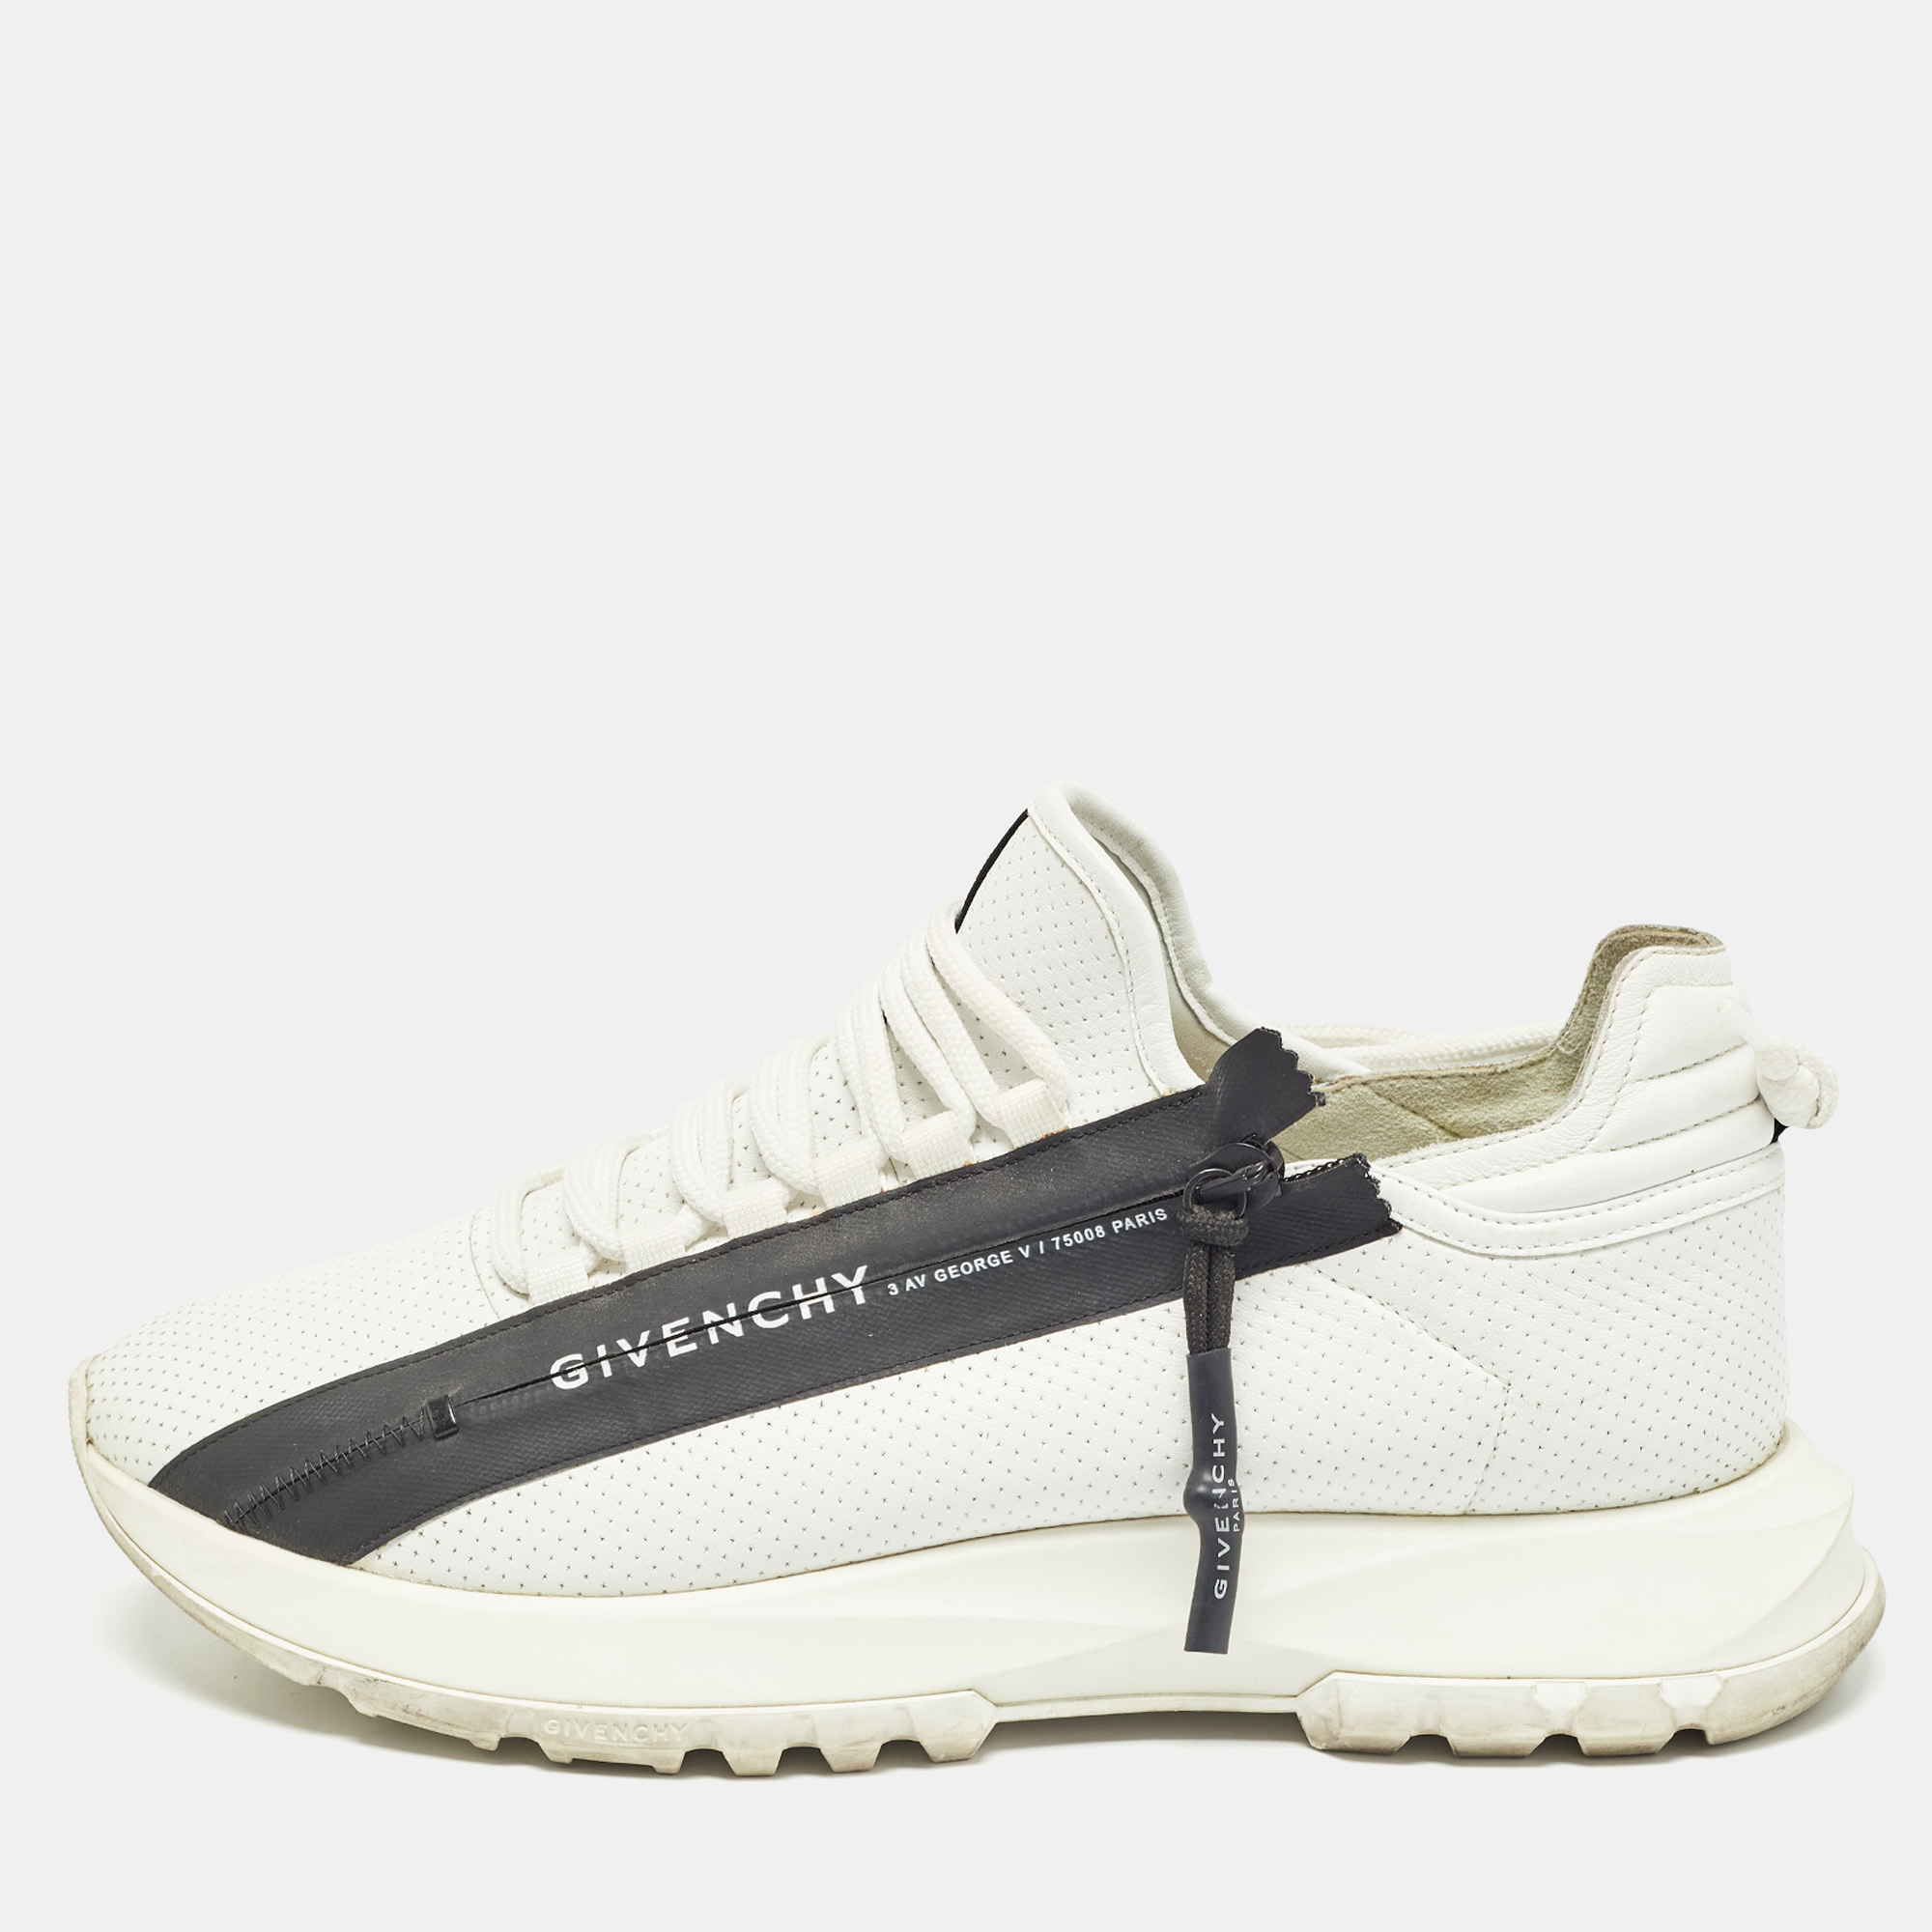 

Givenchy White Leather Lace Up Sneakers Size